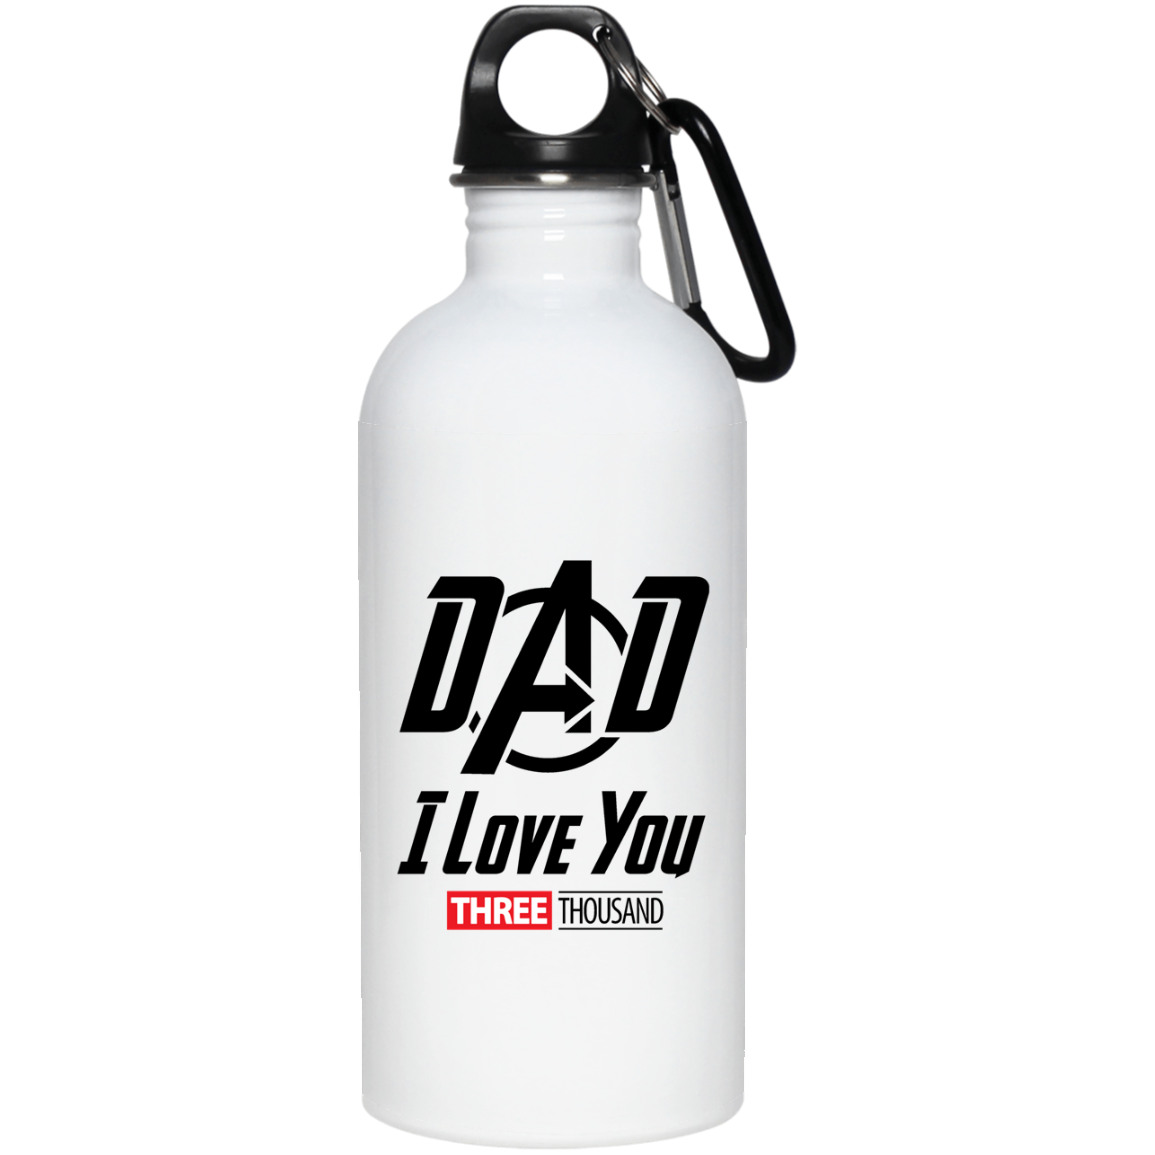 Dad I Love You Three Thousand - 20 oz Stainless Steel Water Bottle